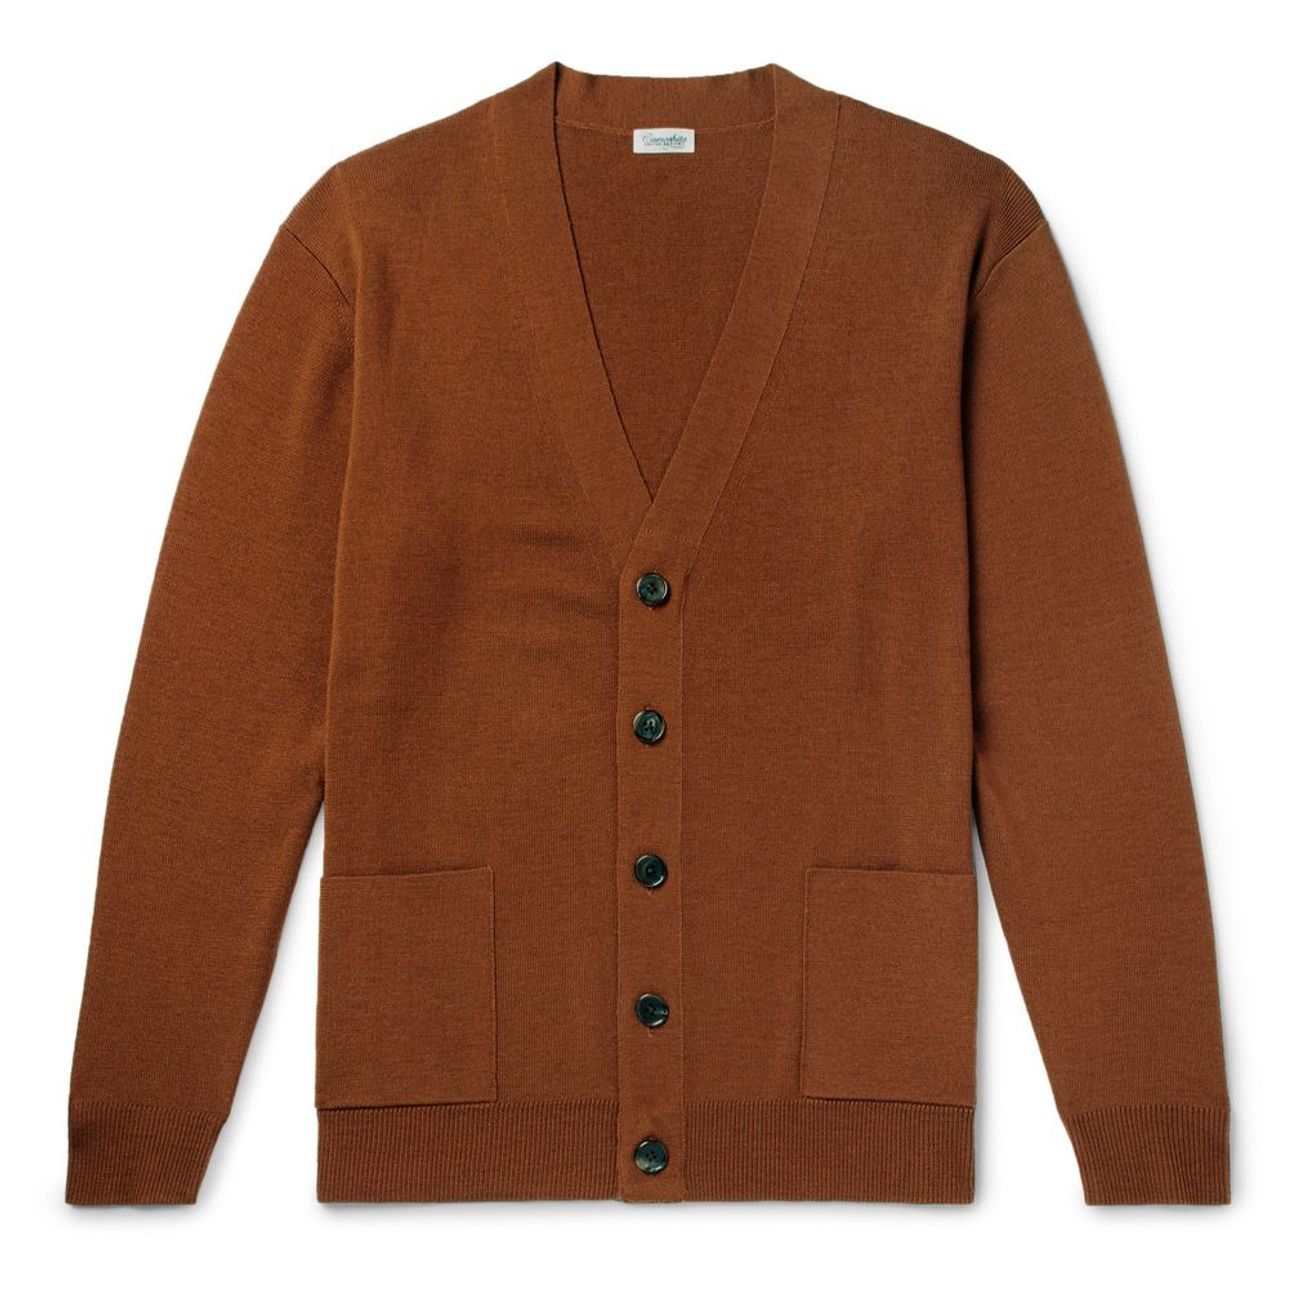 How to wear the rust colour this autumn | Gentleman's Journal ...